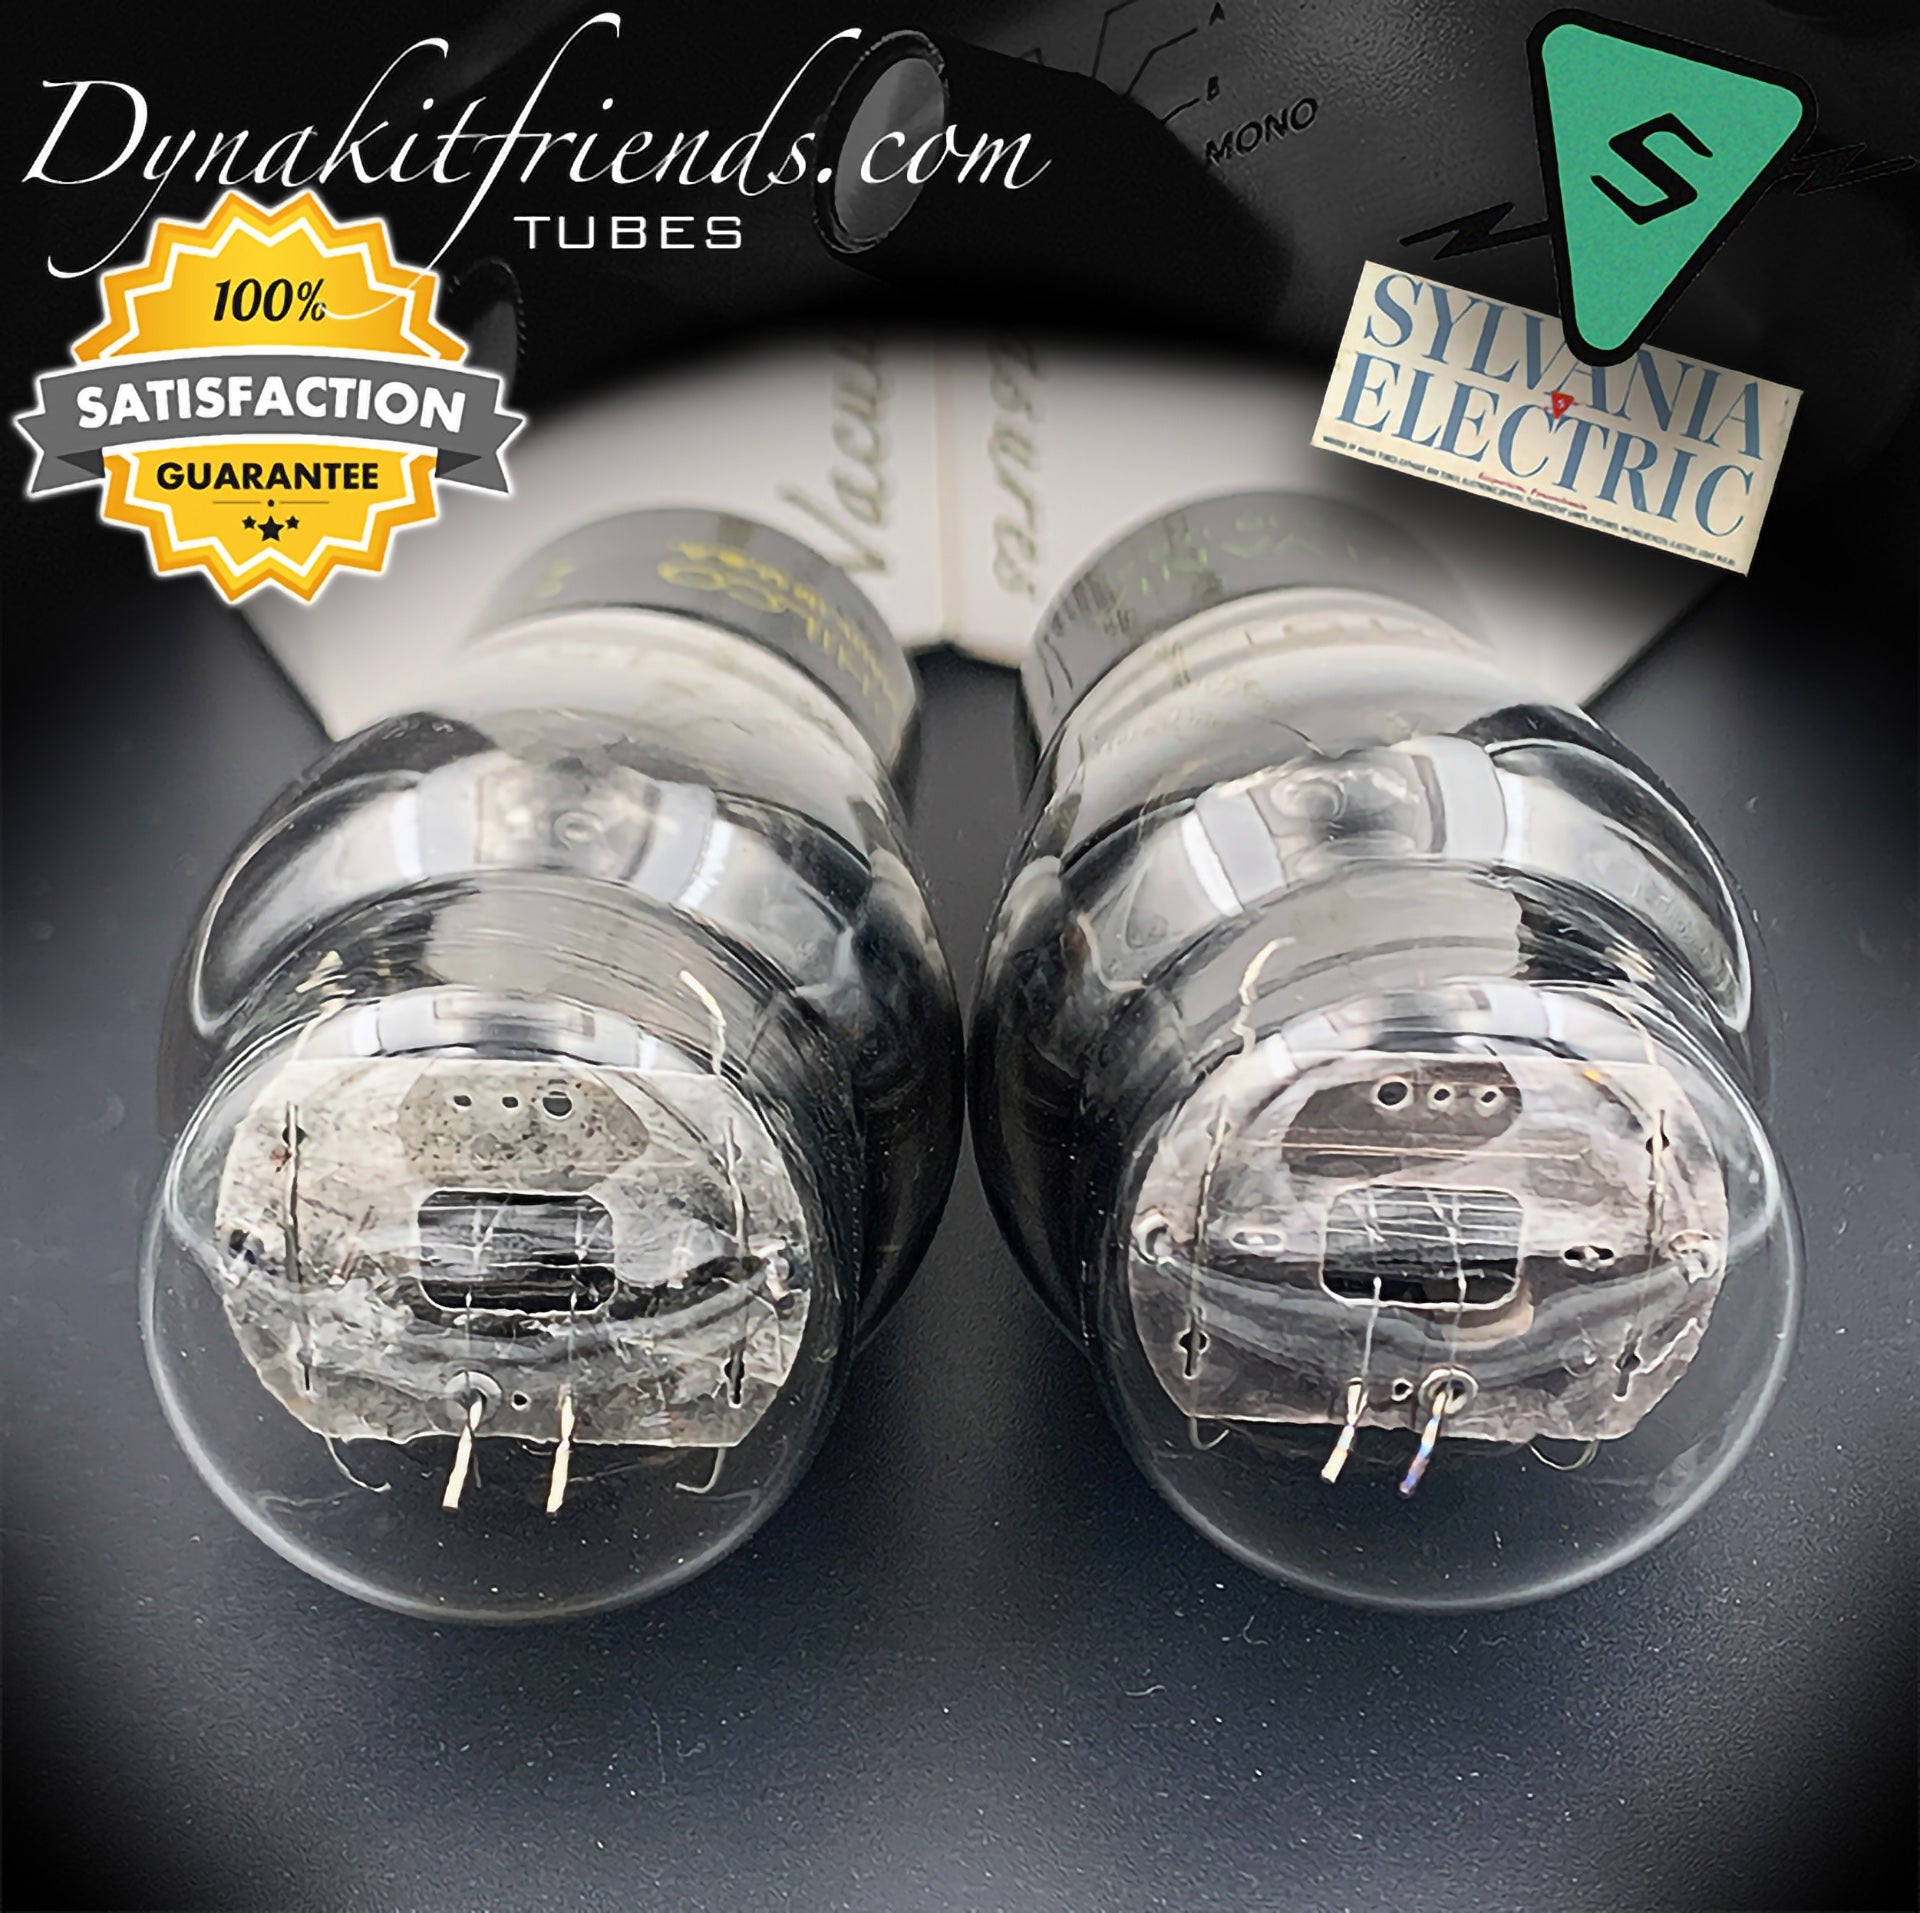 45 ST SYLVANIA Black Plates Foil Dimpled Getter Matched Pair Tubes Made in USA 1940's - Vacuum Tubes Treasures